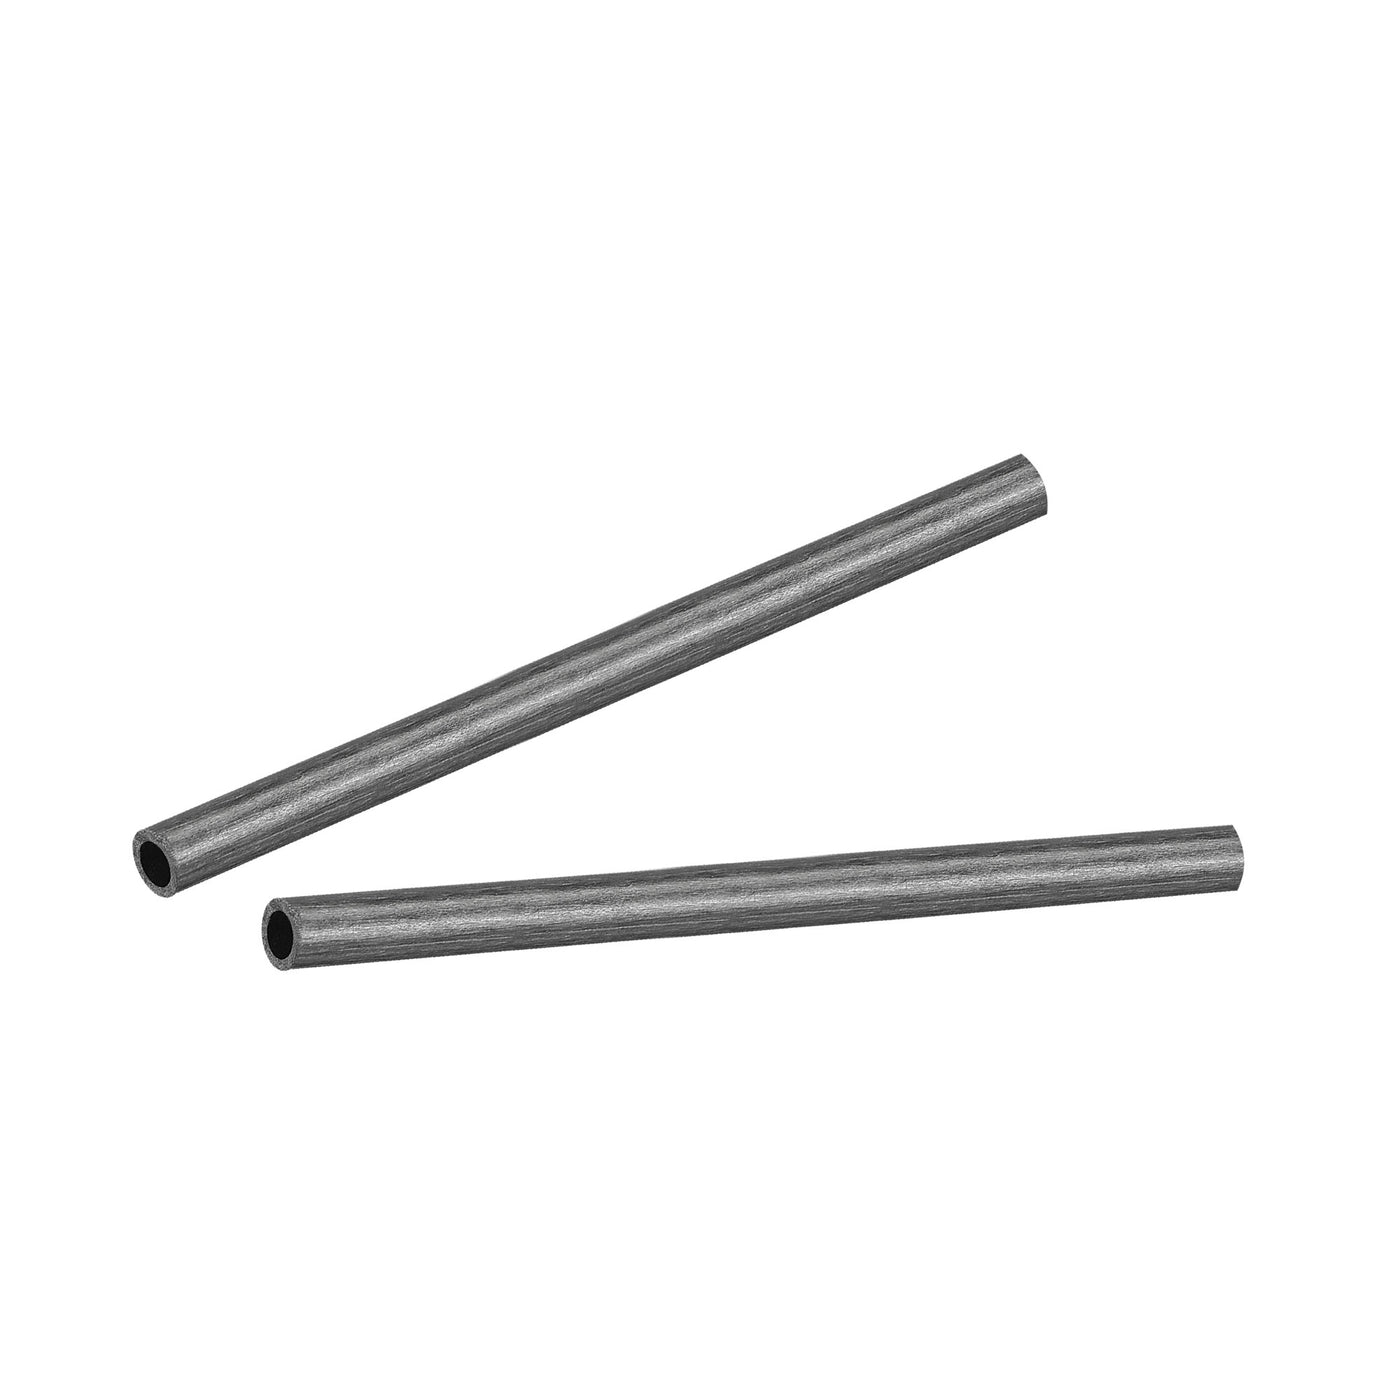 Uxcell Uxcell Carbon Fiber Round Tube 5mm x 3mm x 150mm for RC Airplane Quadcopter 2Pcs